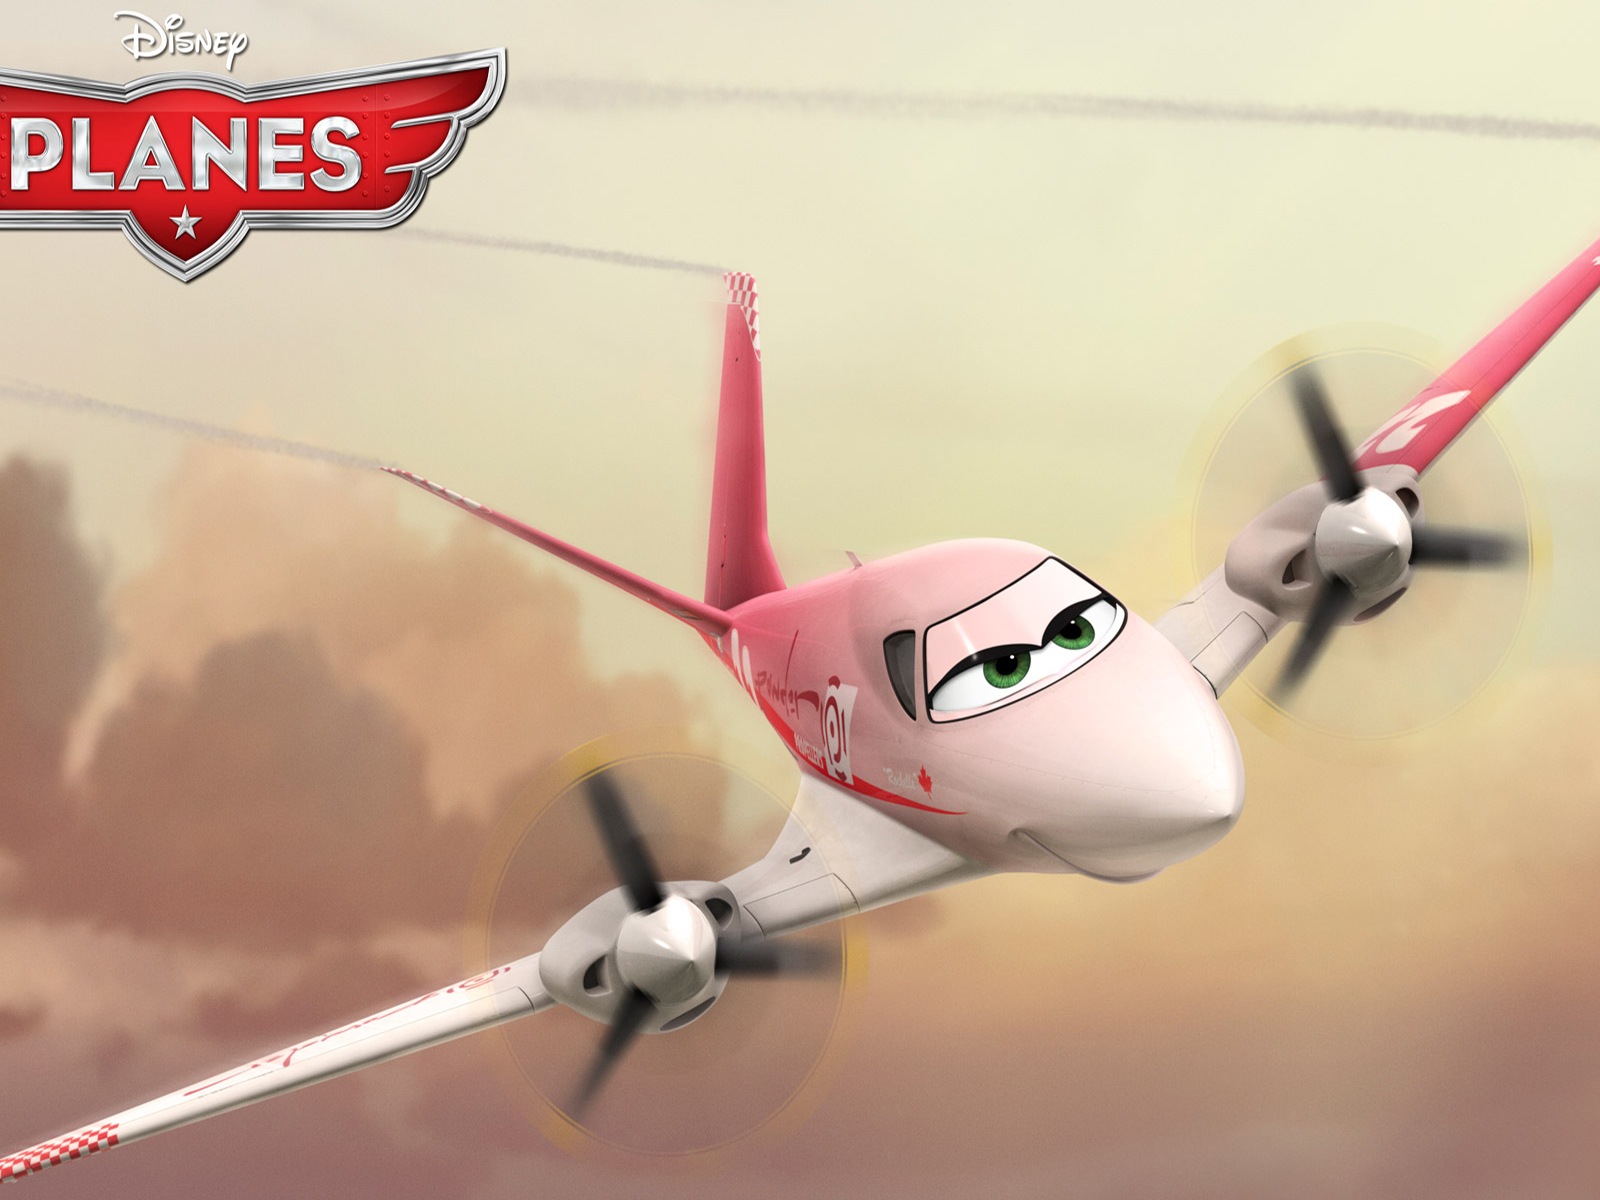 Planes 2013 HD wallpapers #12 - 1600x1200